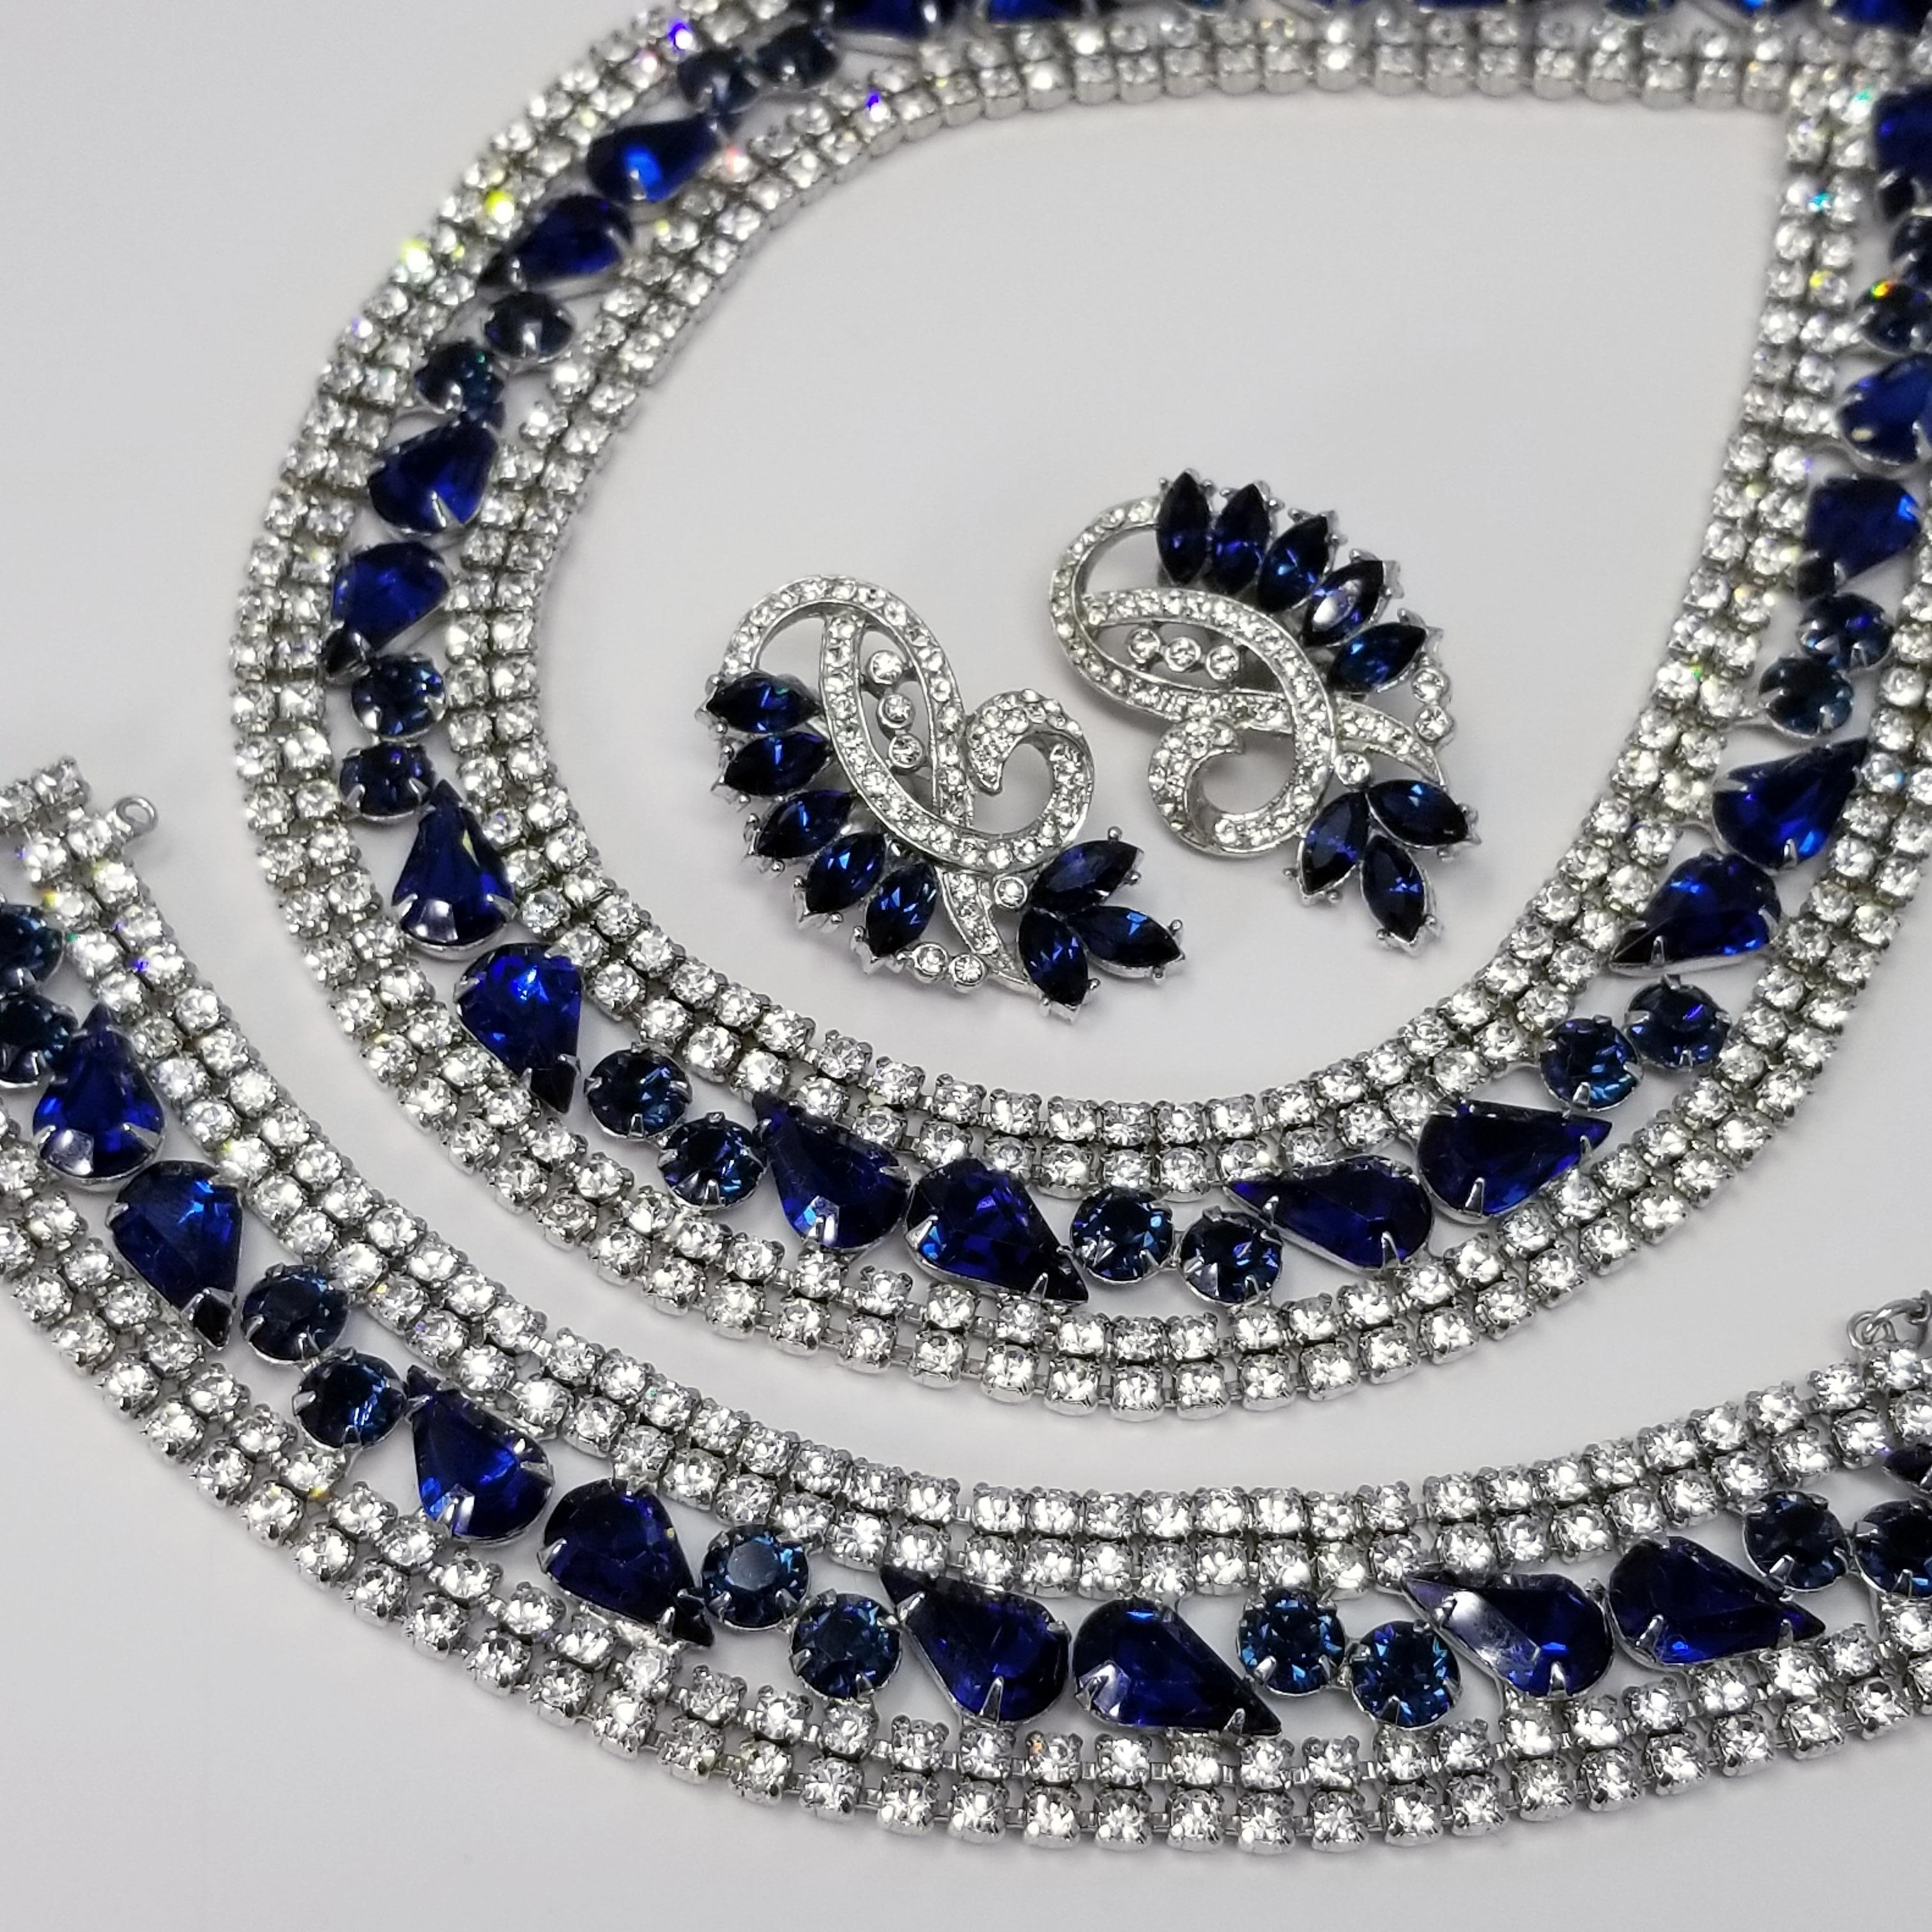 Deep blue faceted sapphire rhinestones and glittering clear rhinestones prong set in rhodium-plated settings. Excellent craftsmanship! All pieces in the set are signed. Ideal condition, never worn. All stones are intact originals. Clips are tight